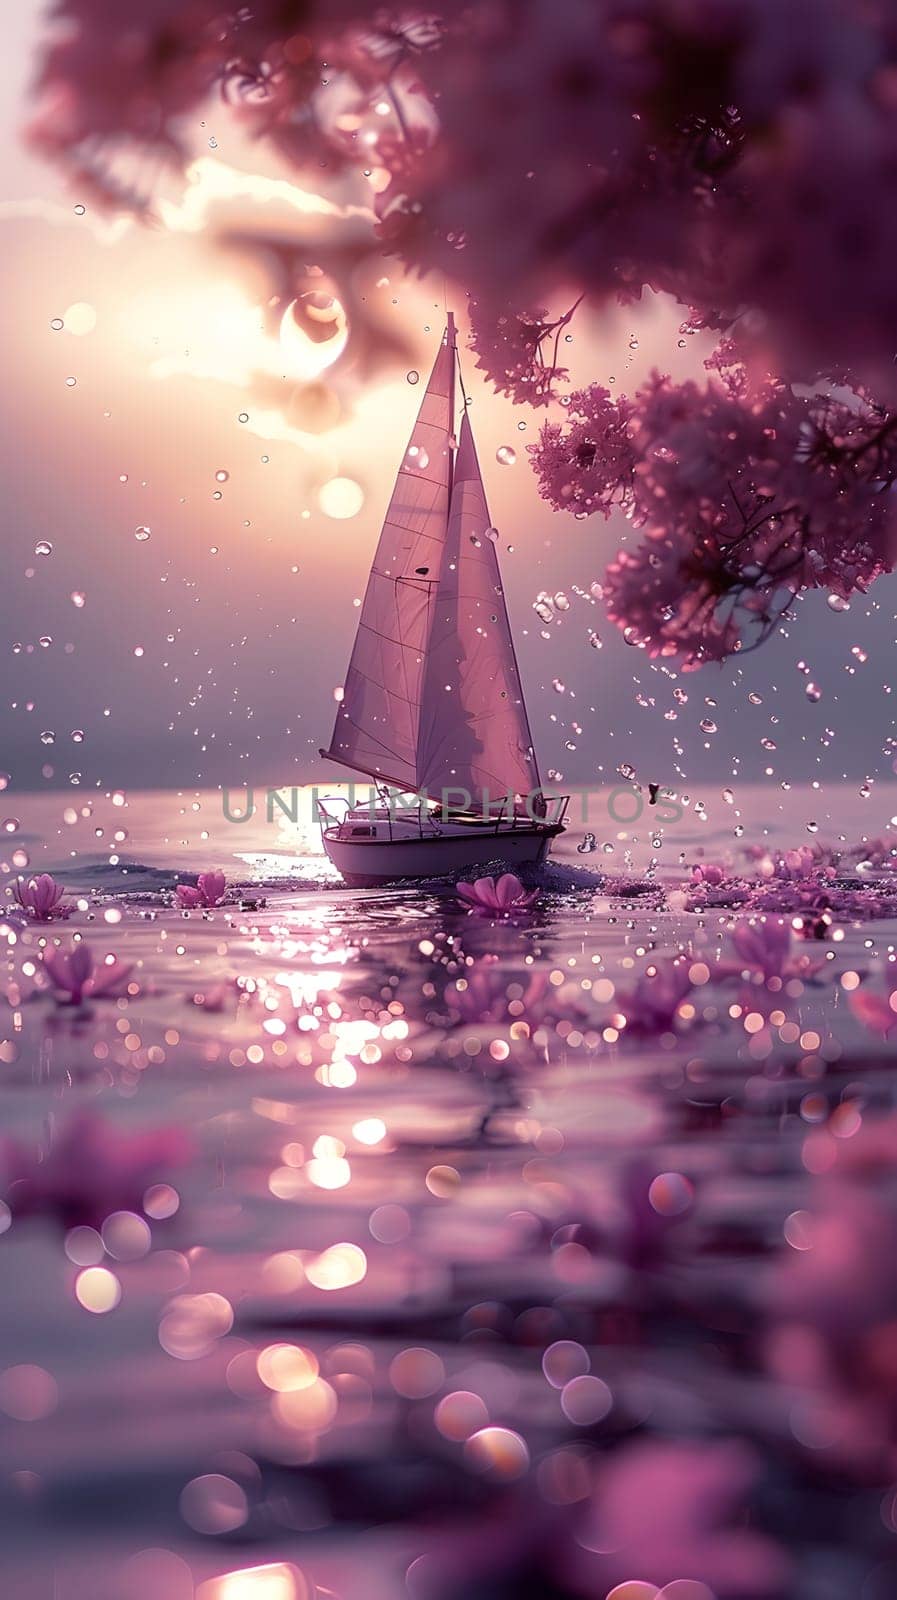 A violet sailboat glides on the fluid surface of the water, framed by cherry blossom trees under a clear sky with fluffy white clouds